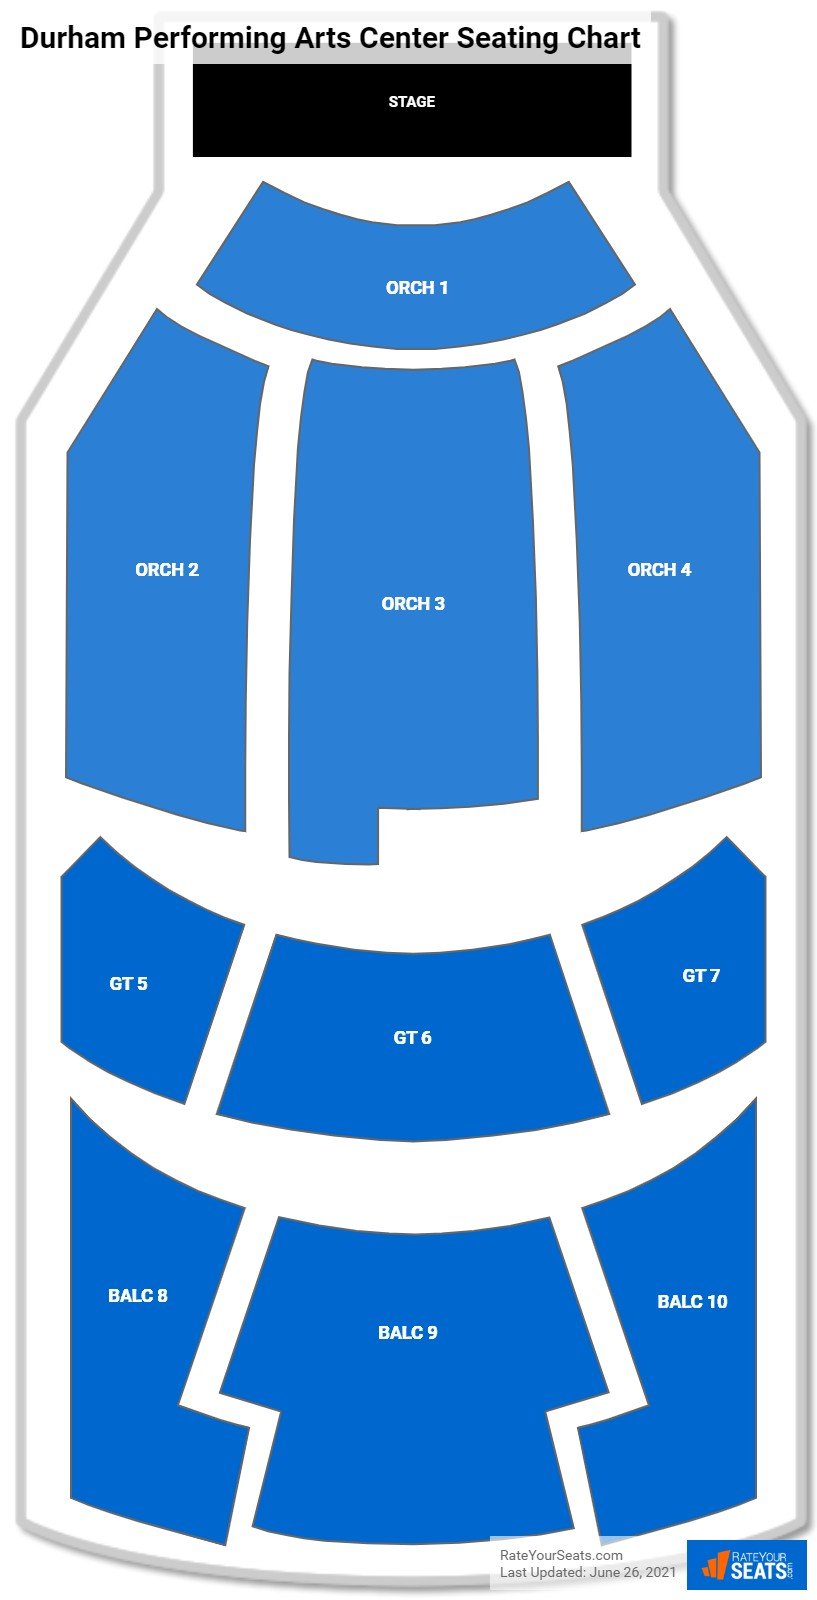 Durham Performing Arts Center Theater Seating Chart